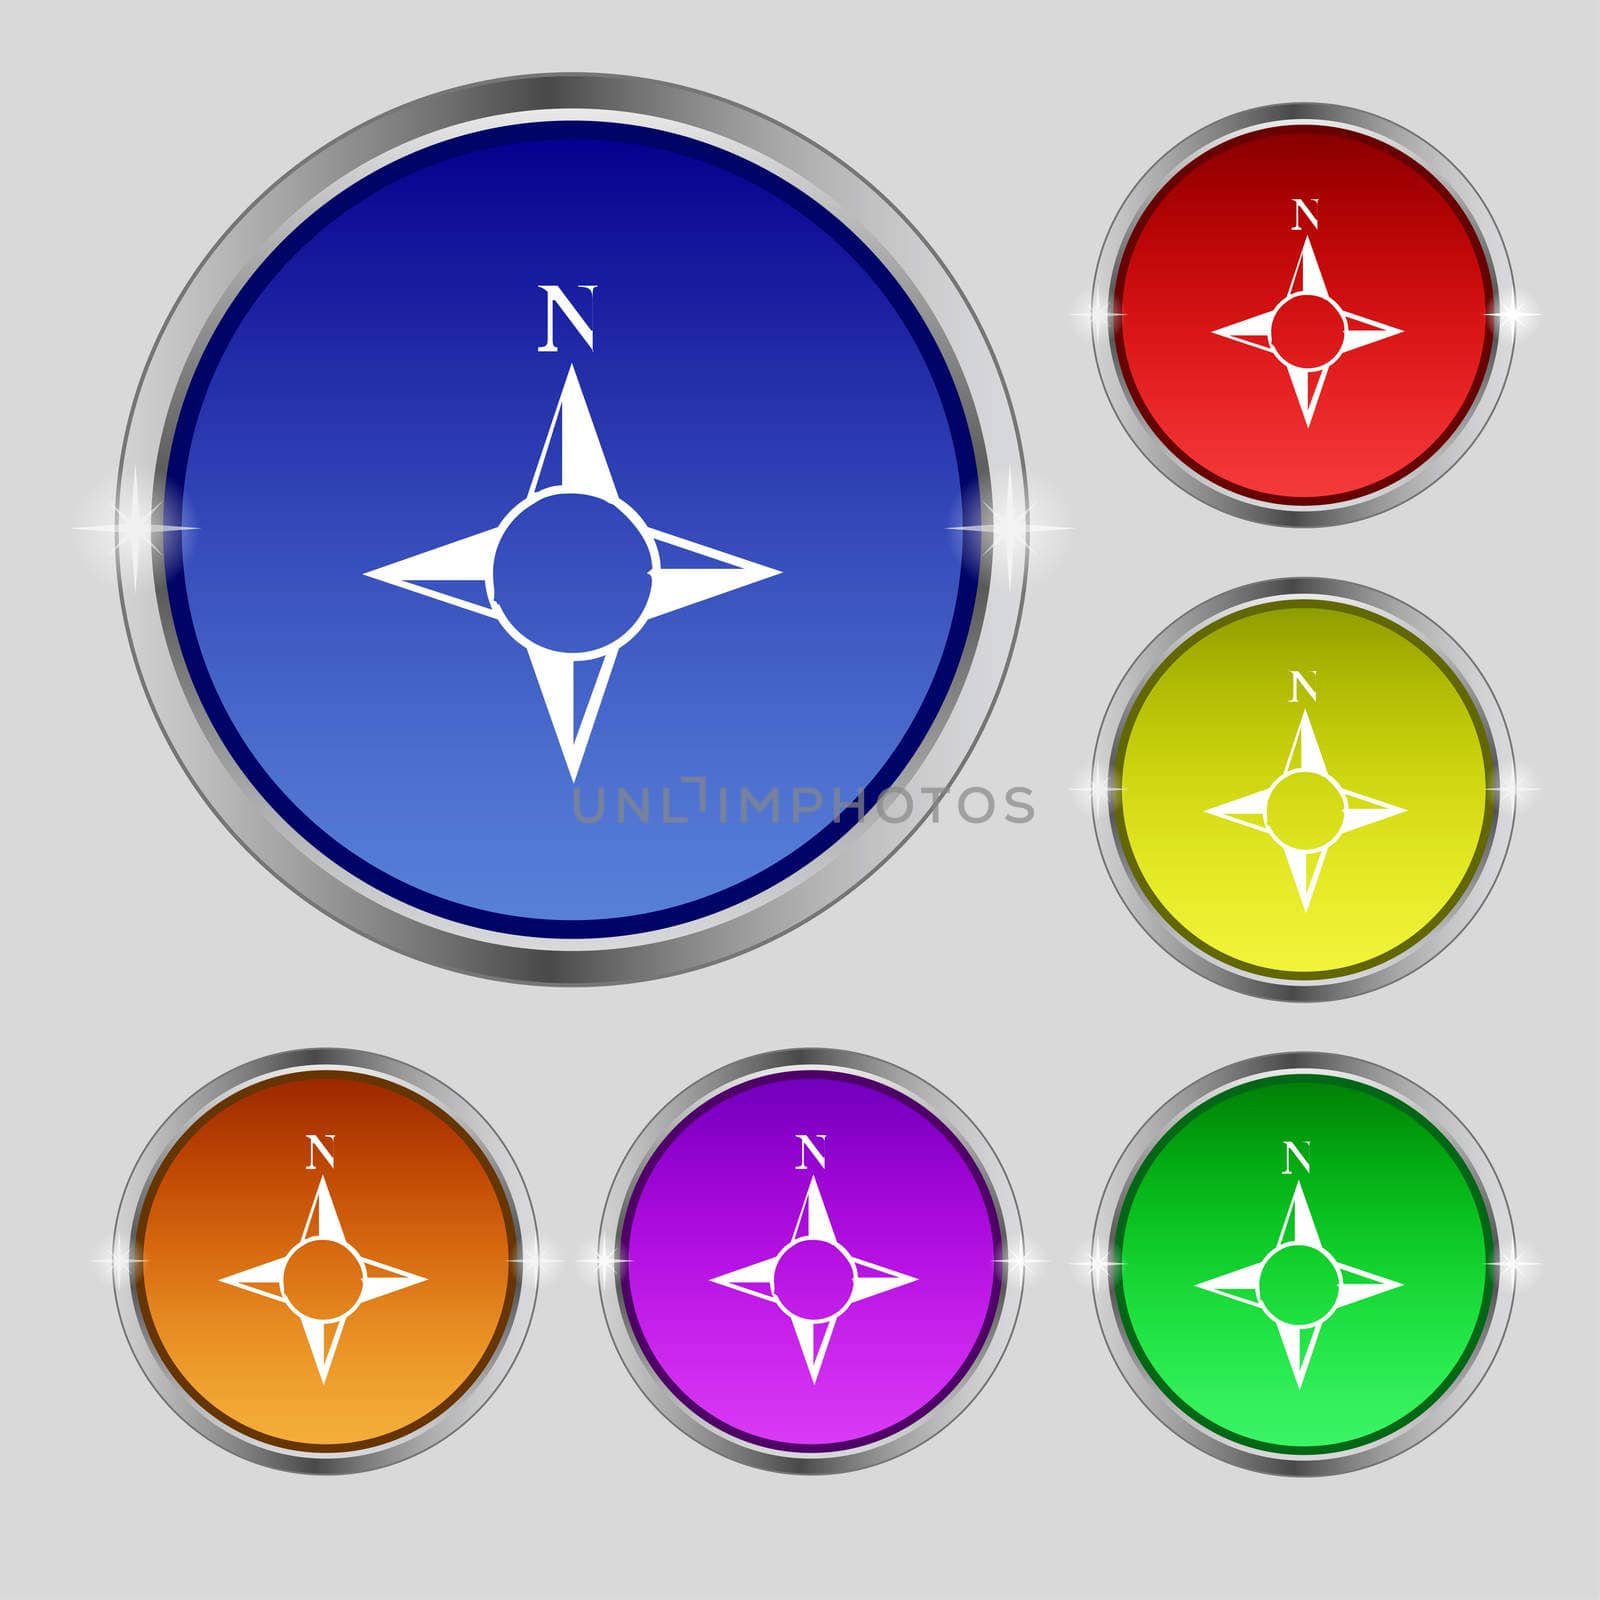 Compass sign icon. Windrose navigation symbol. Set colourful buttons. illustration